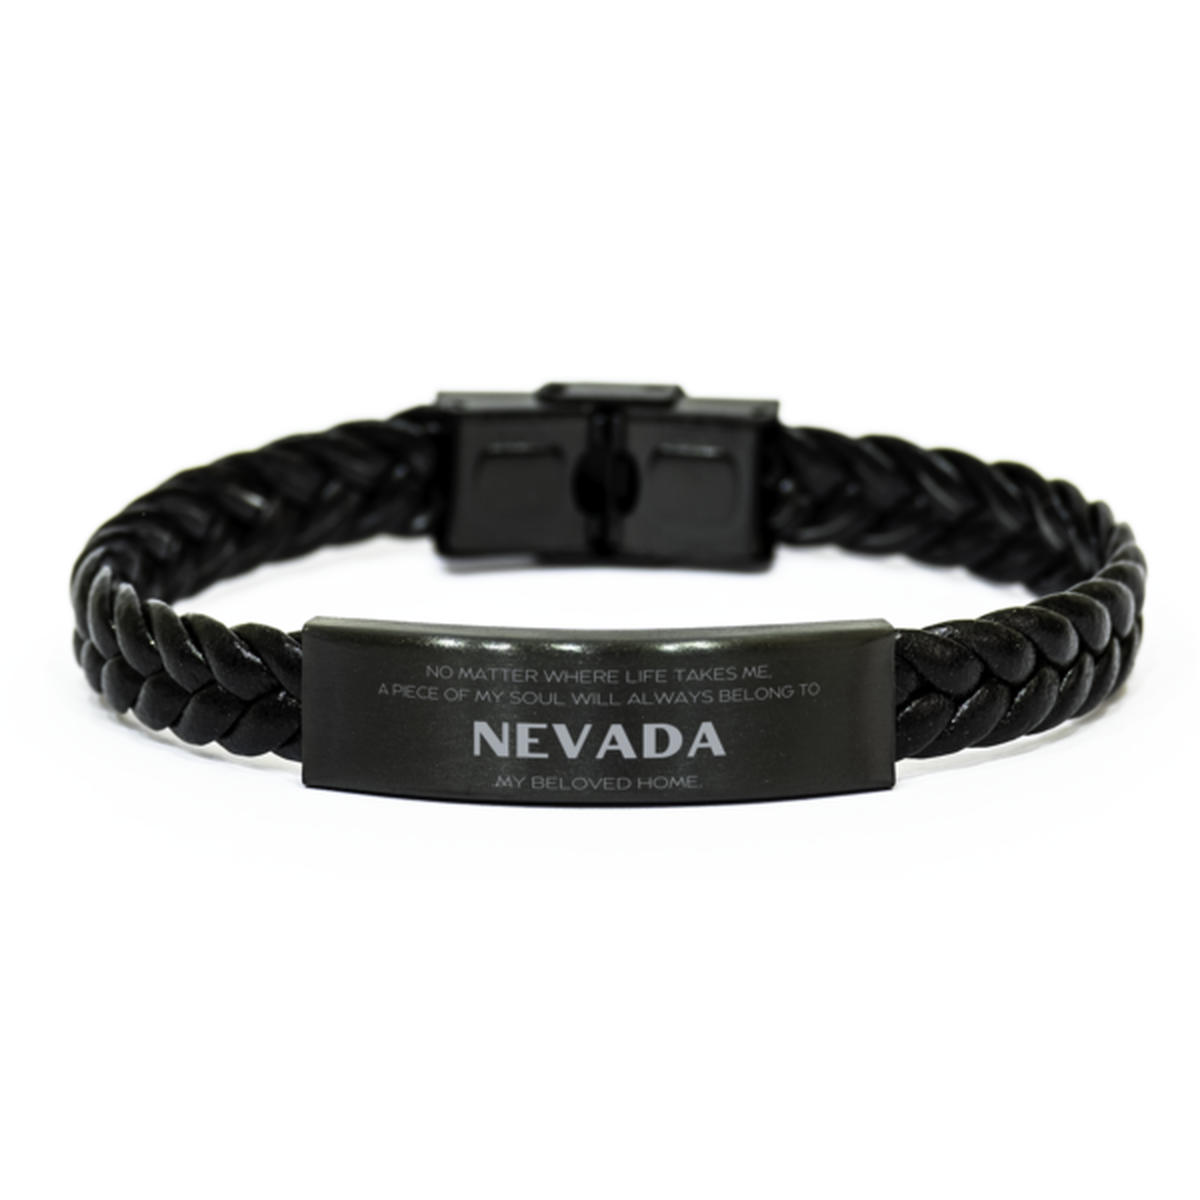 Love Nevada State Gifts, My soul will always belong to Nevada, Proud Braided Leather Bracelet, Birthday Unique Gifts For Nevada Men, Women, Friends